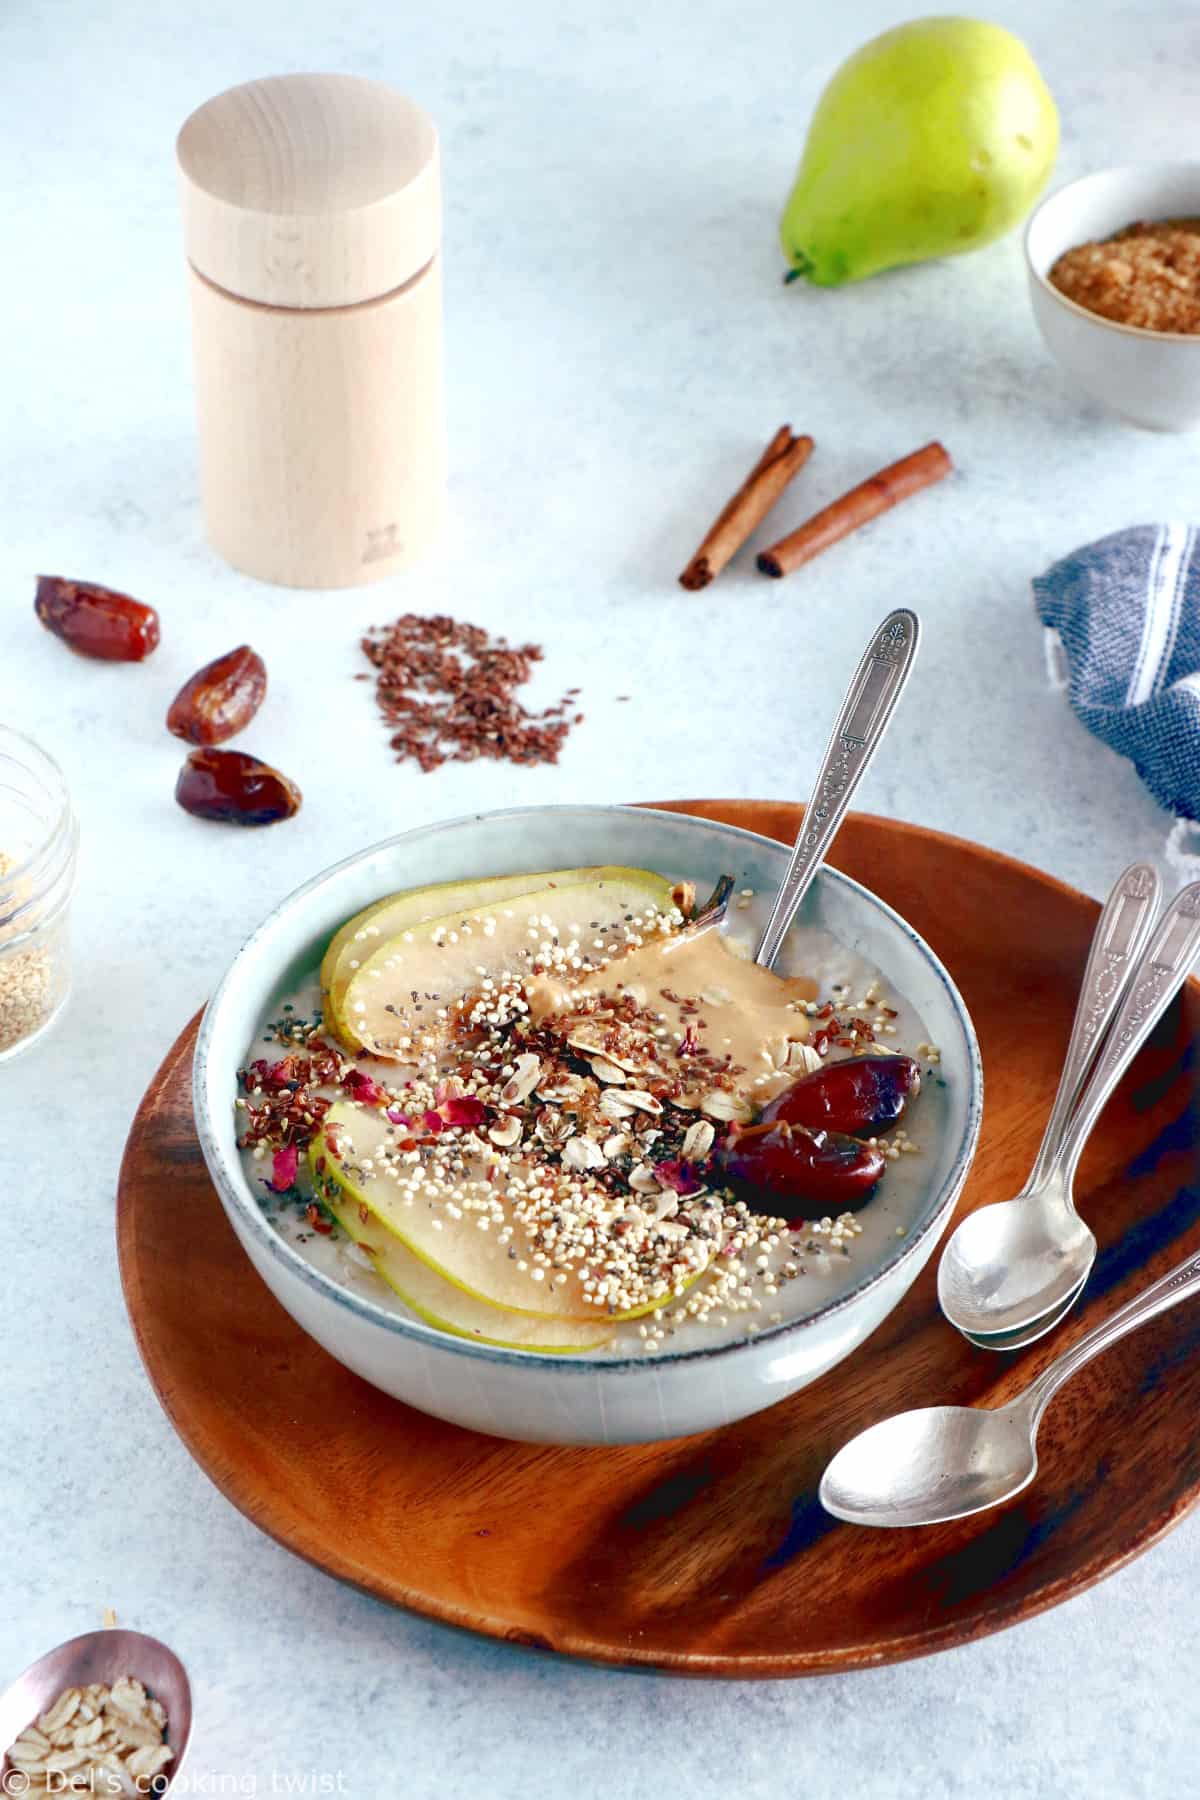 Healthy Nut Butter Flaxseed Oatmeal Bowl is a satisfying 5-minute healthy breakfast. Wholesome and nourishing, it's packed with nutritious ingredients and perfectly delicious.